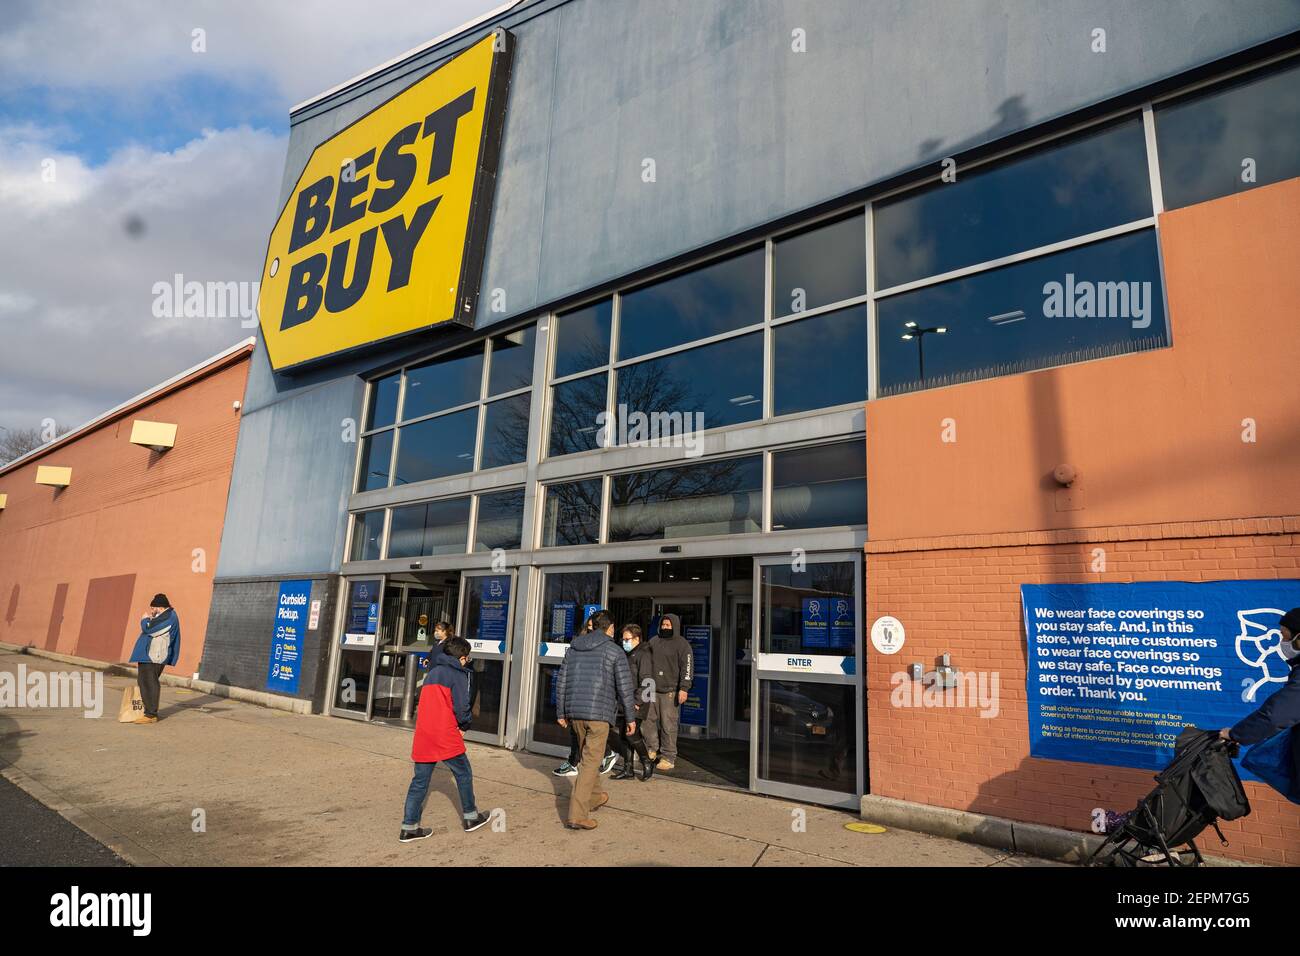 NEW YORK, NY – FEBRUARY 27:  Customers walk in and out of a Best Buy store in Queens on February 27, 2021 in New York City.  Best Buy Co. (BBY) lays off 5,000 workers, the majority of whom worked full-time and adding approximately 2,000 new part-time positions as it shifts focus to online sales.  The pandemic has accelerated Best Buy's transition to selling online said Chief Executive Corie Barry on a call with analysts on Thursday. Credit: Ron Adar/Alamy Live News Stock Photo